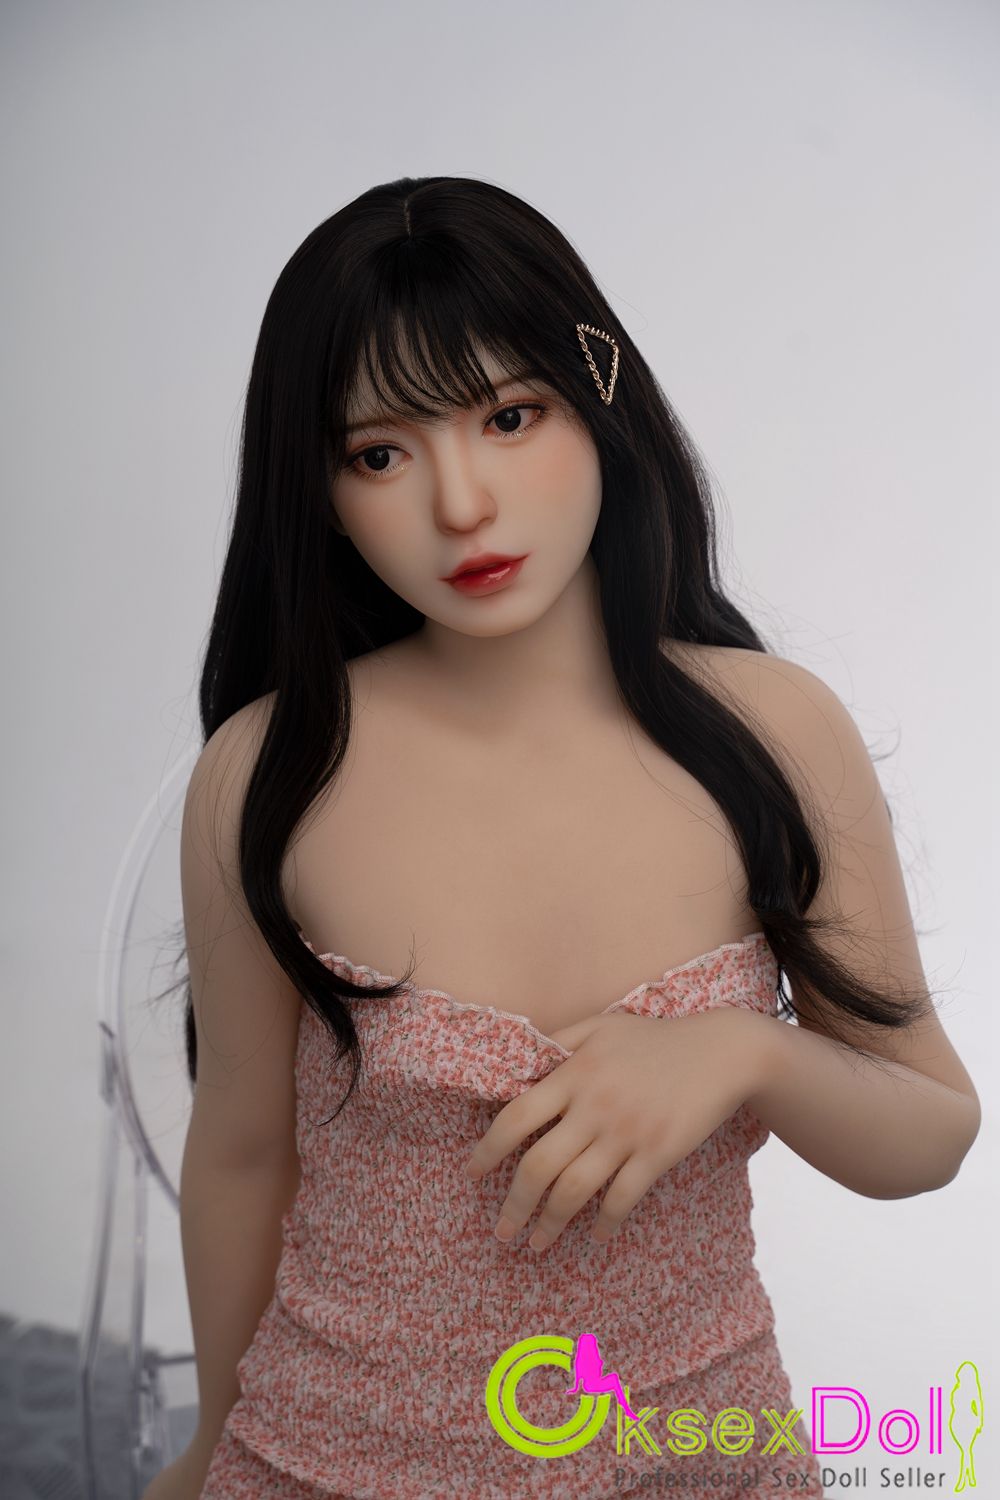 AXB doll Pictures